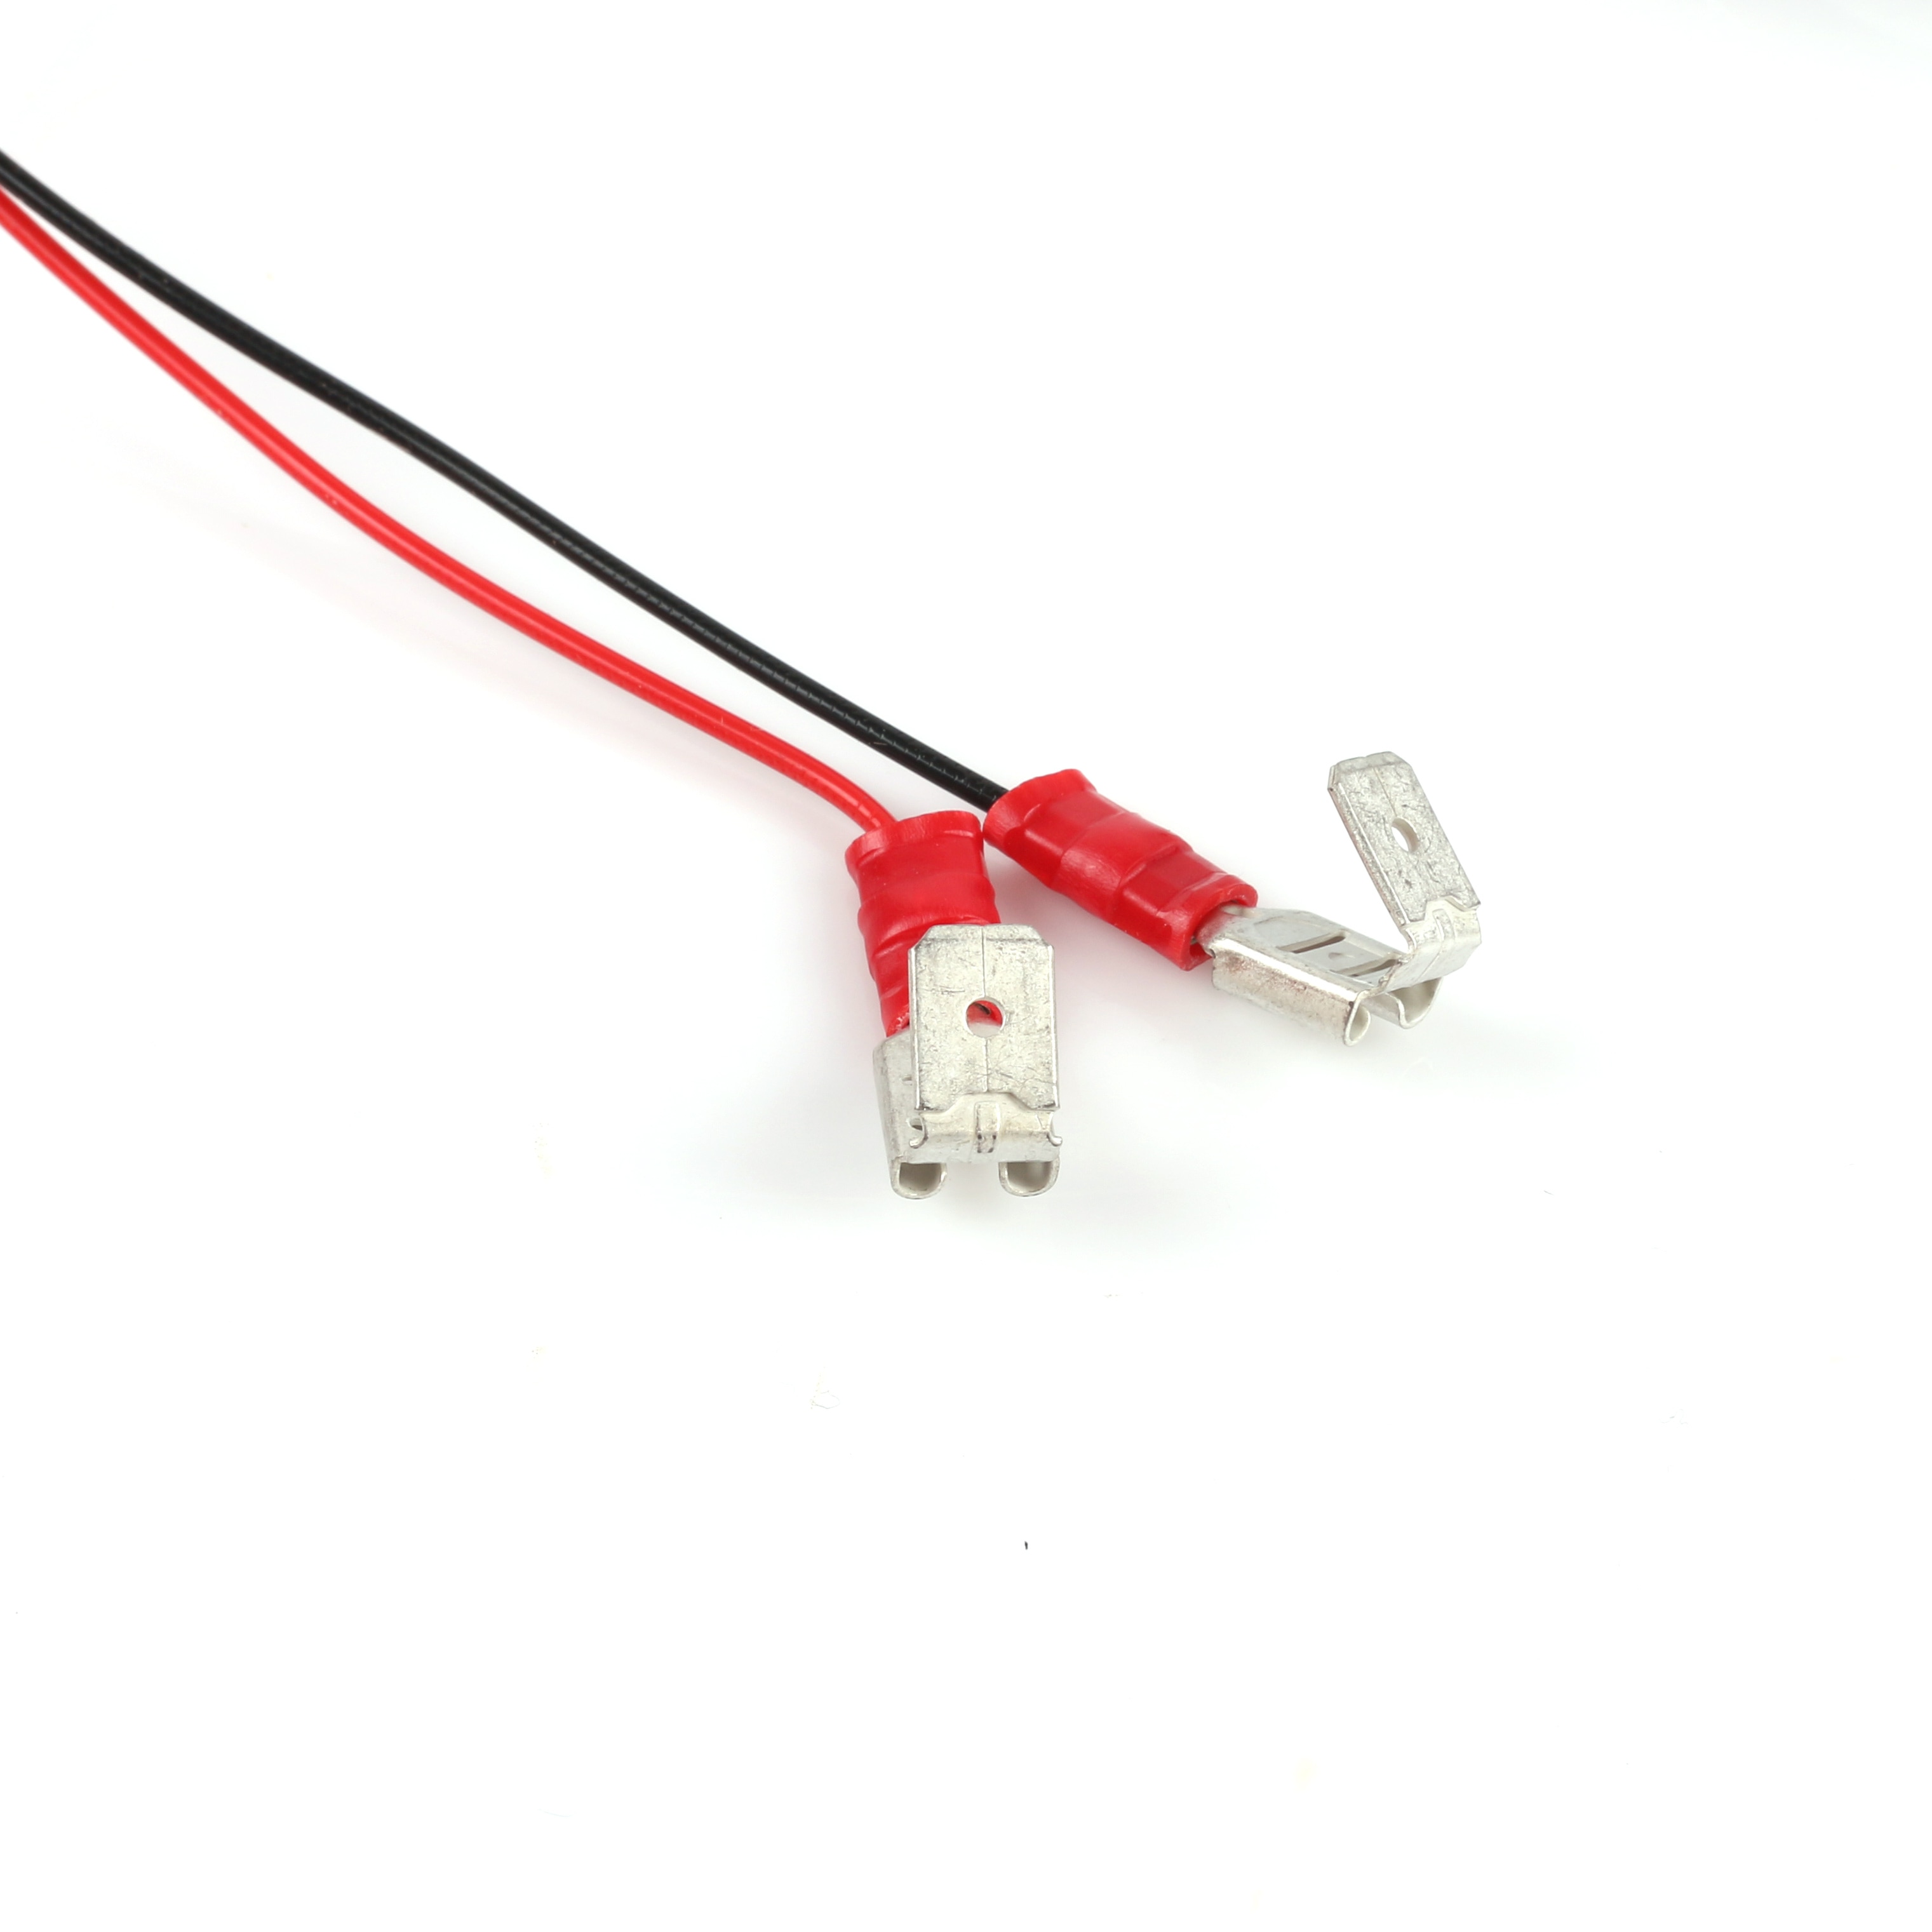 Power Cable for 12 v battery, MyChron 4/5